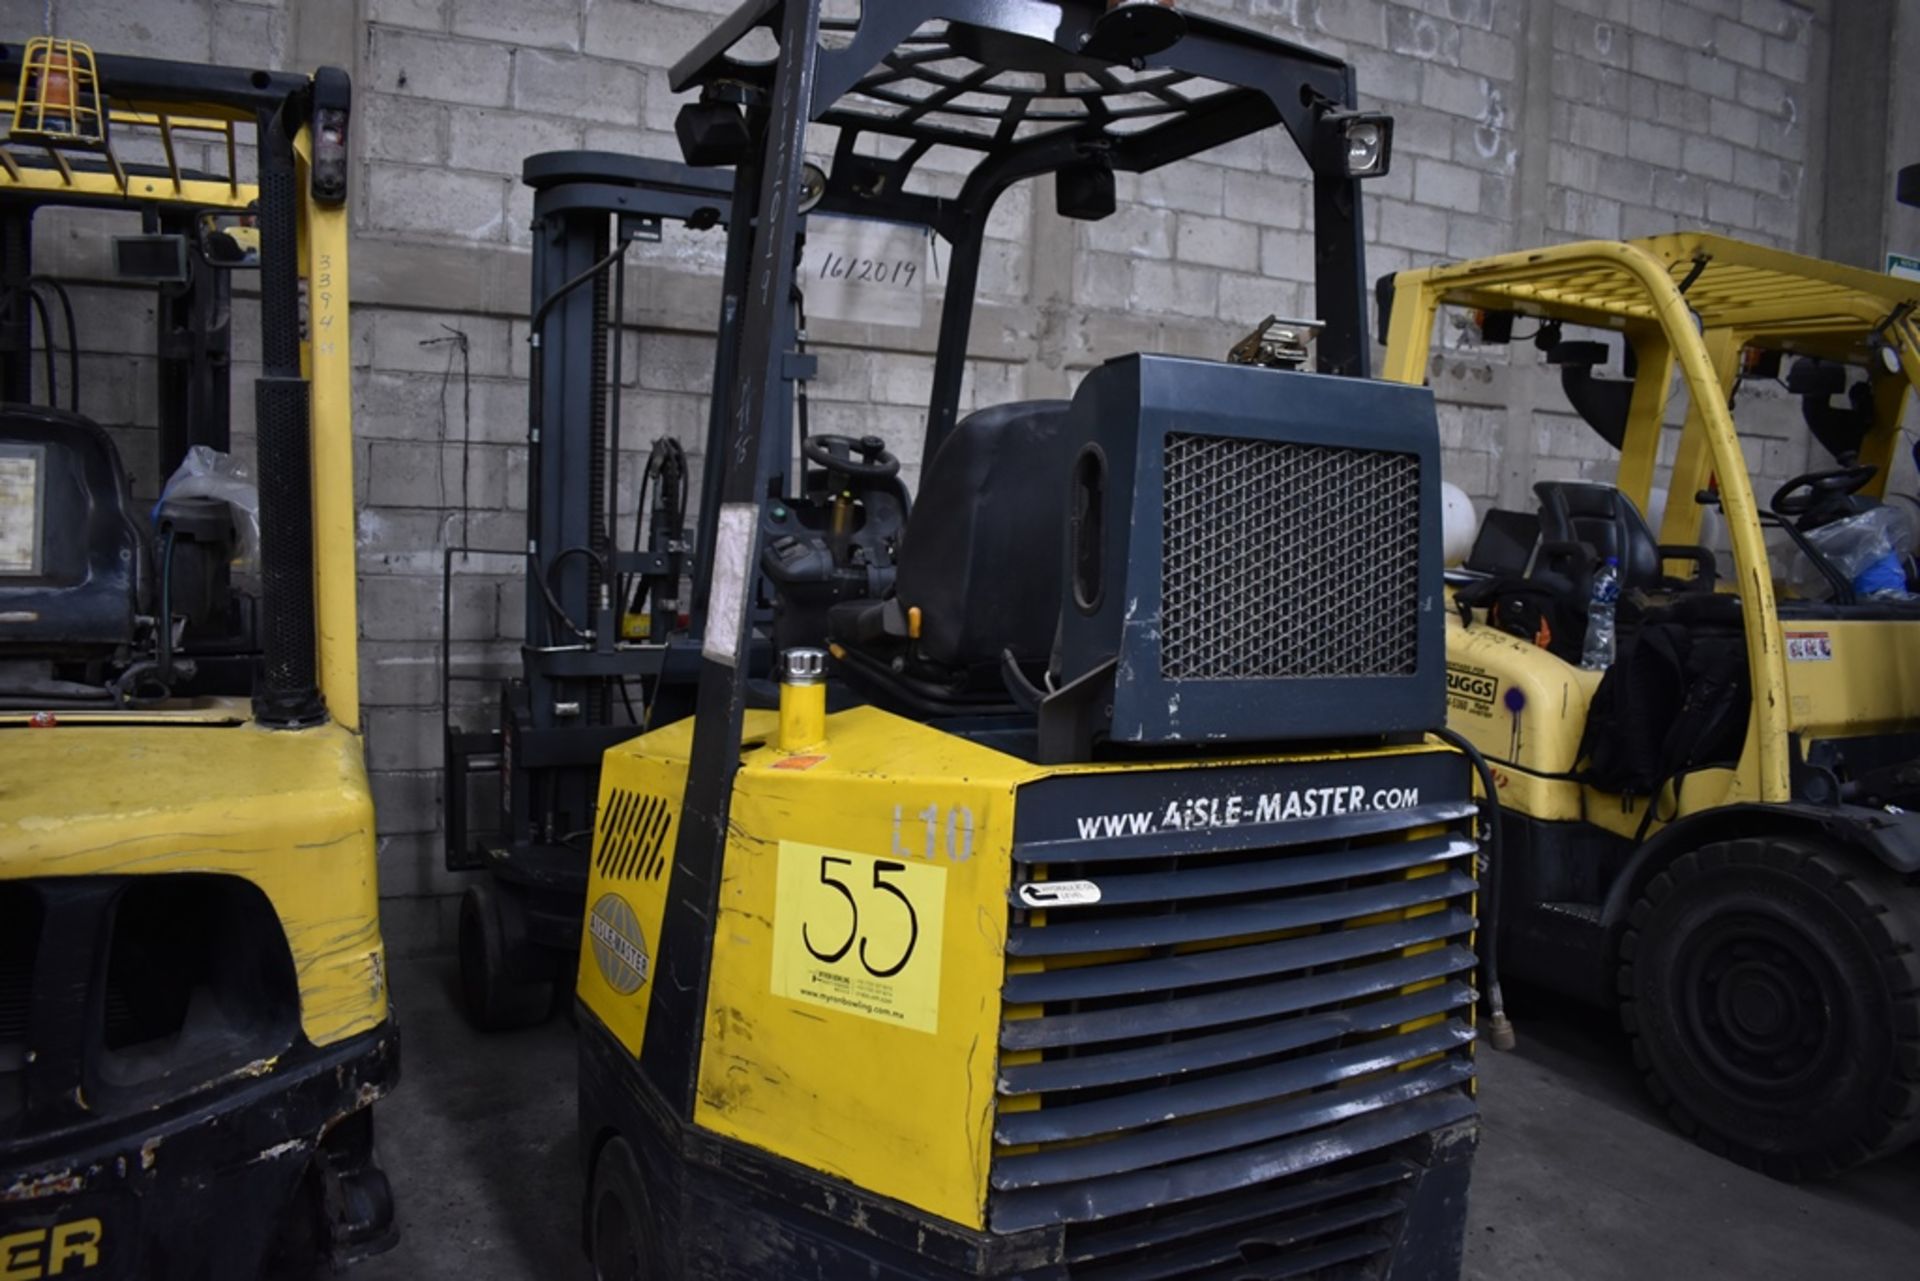 Aisle-master Forklift, model 20S, 2 tons capacity - Image 13 of 50